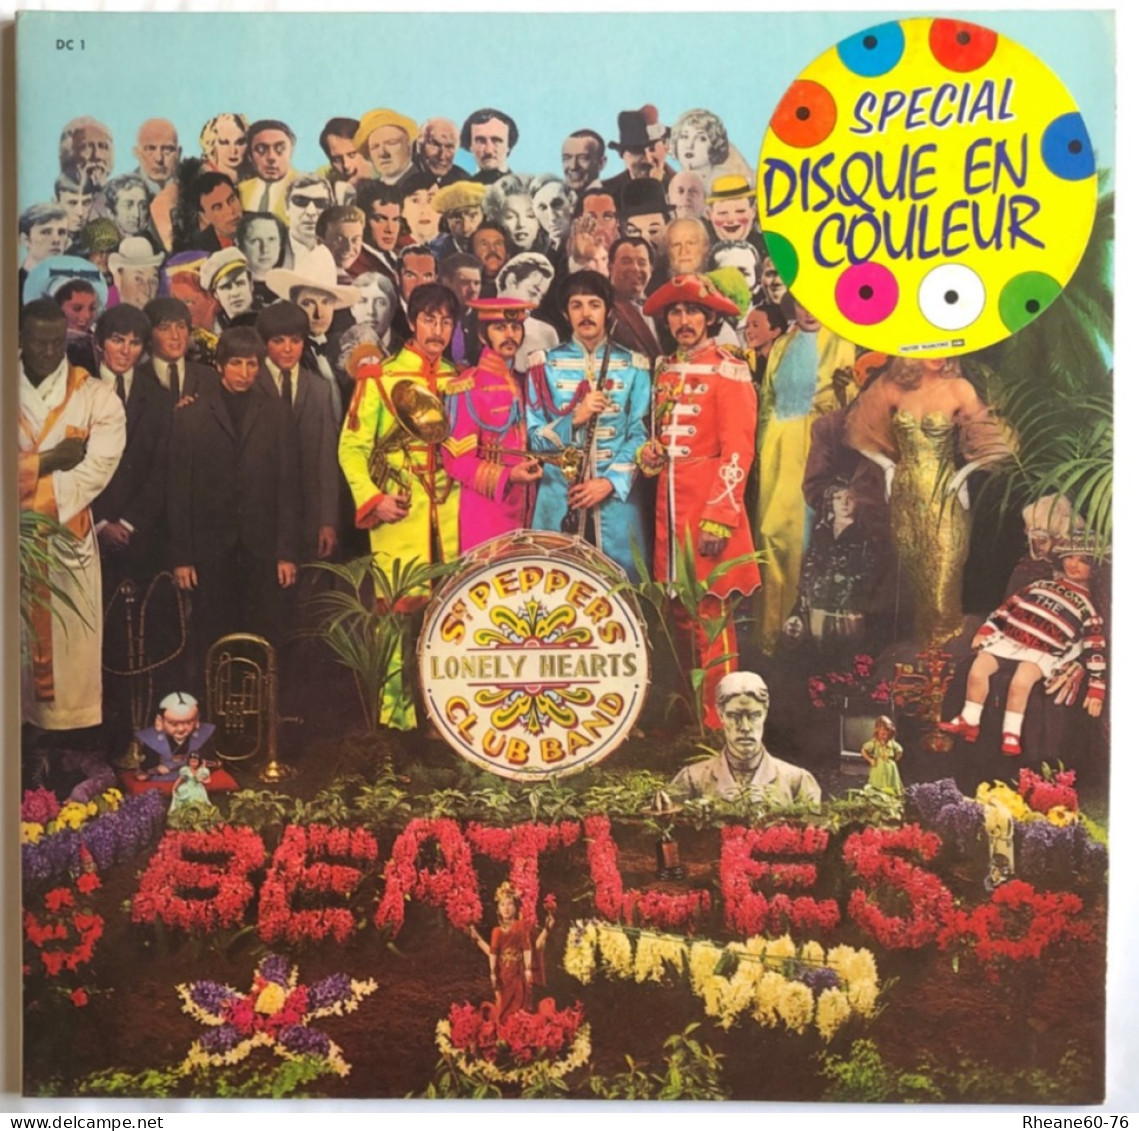 EMI Parlophone - C 066 04 177 - The Beatles - Disque Rouge - Sgt Pepper's Lonely Hearts Club Band - DC1 - Altri - Inglese